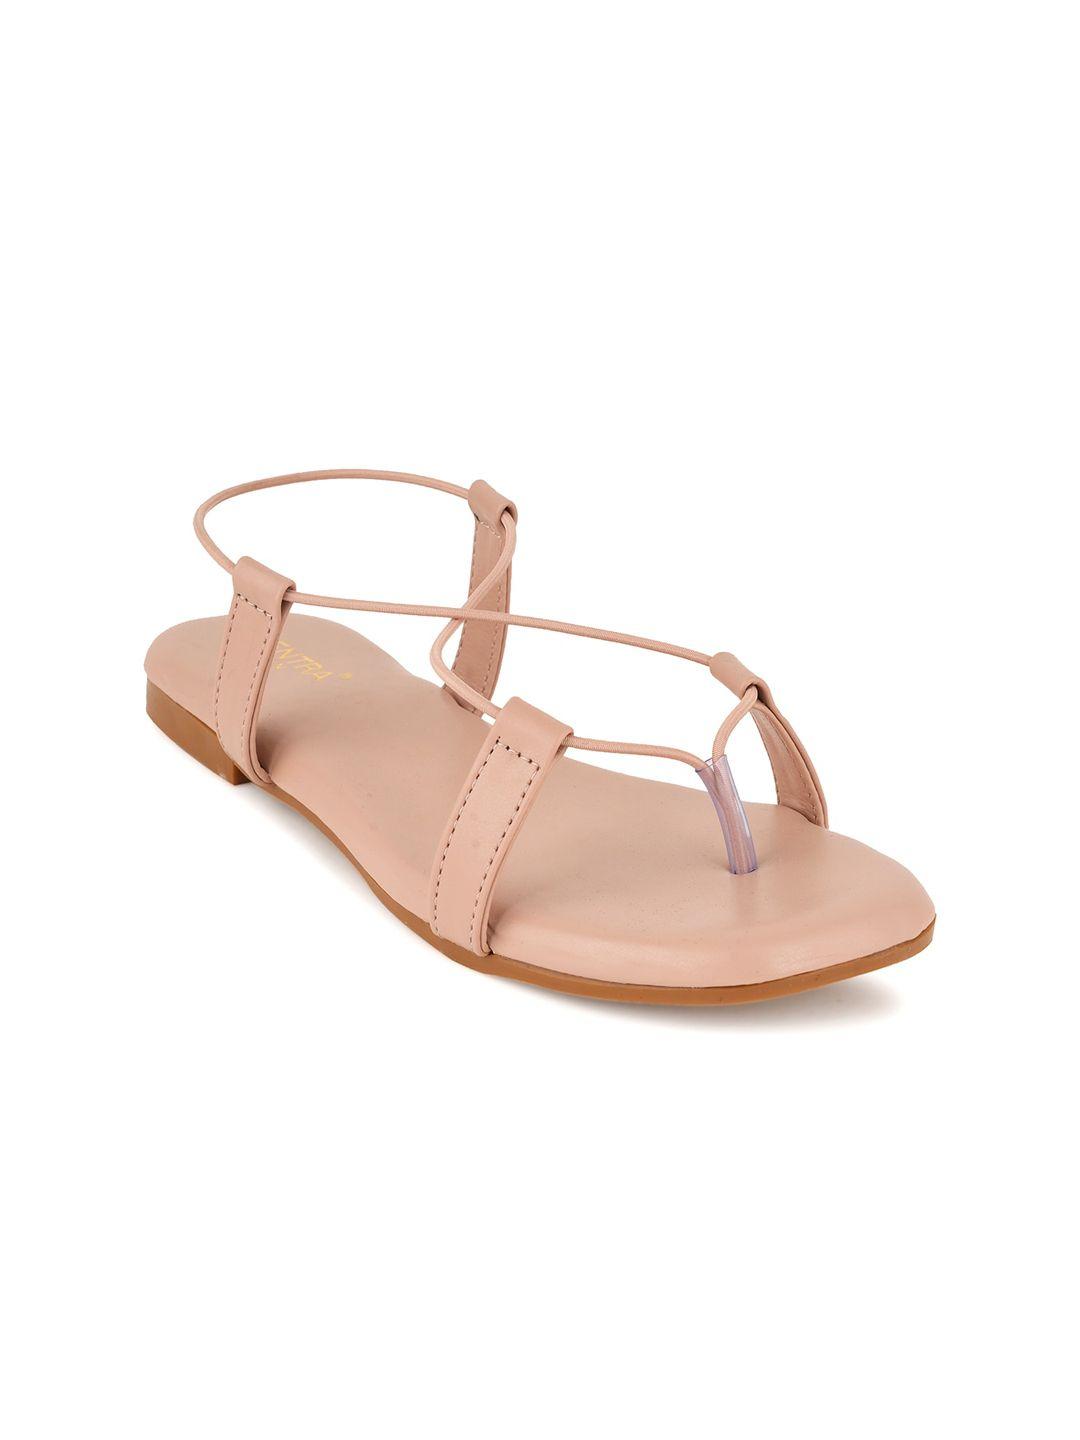 scentra one toe flats with backstrap